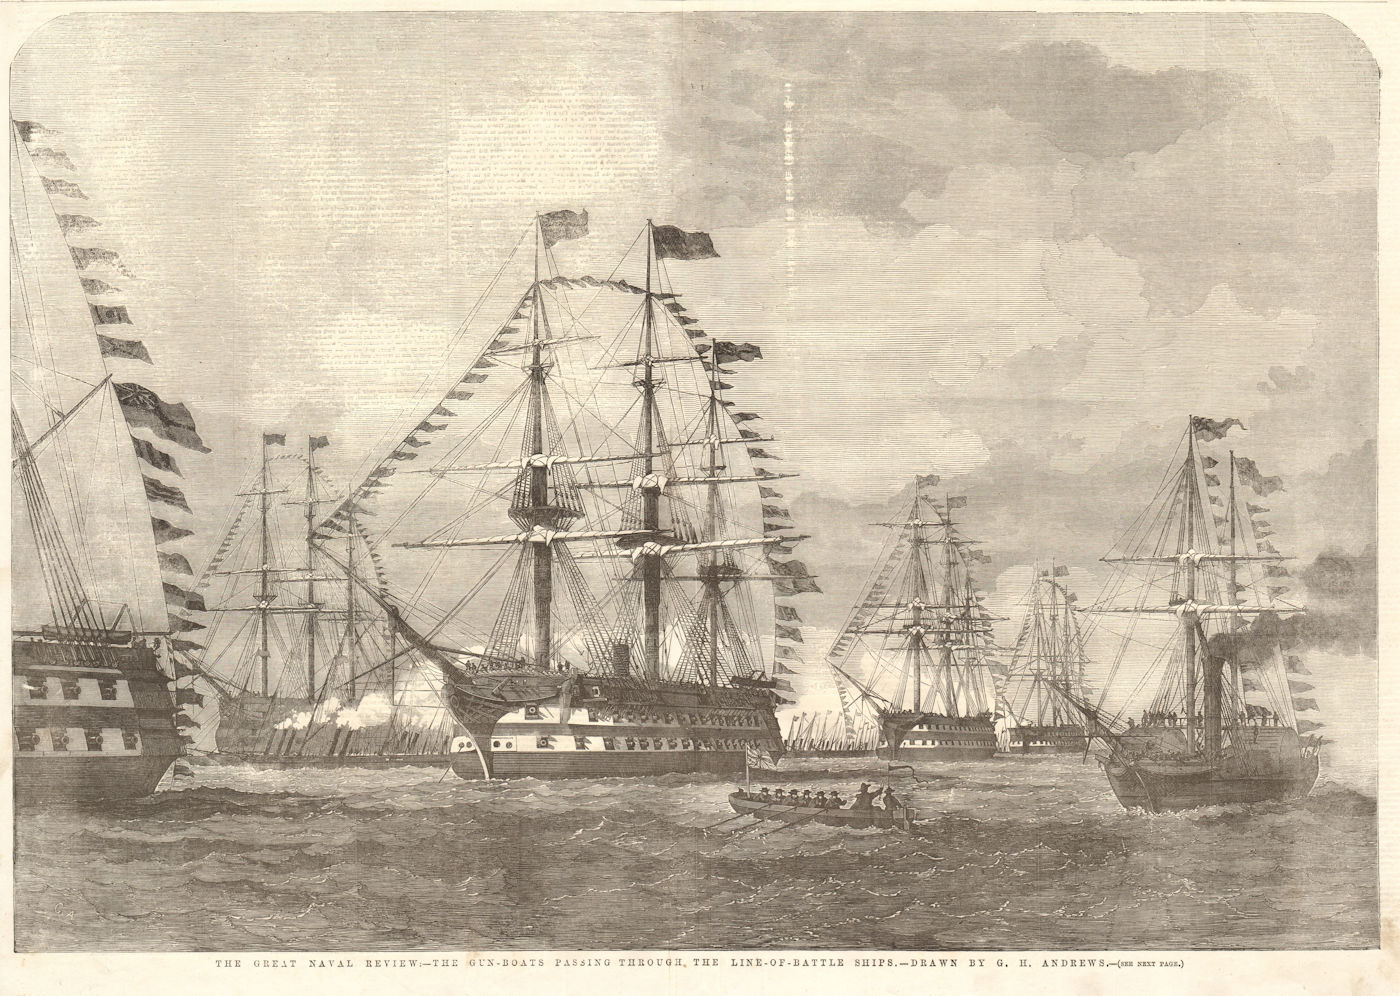 Associate Product Naval Review: the gun-boats passing the line-of-battleships. Portsmouth 1856